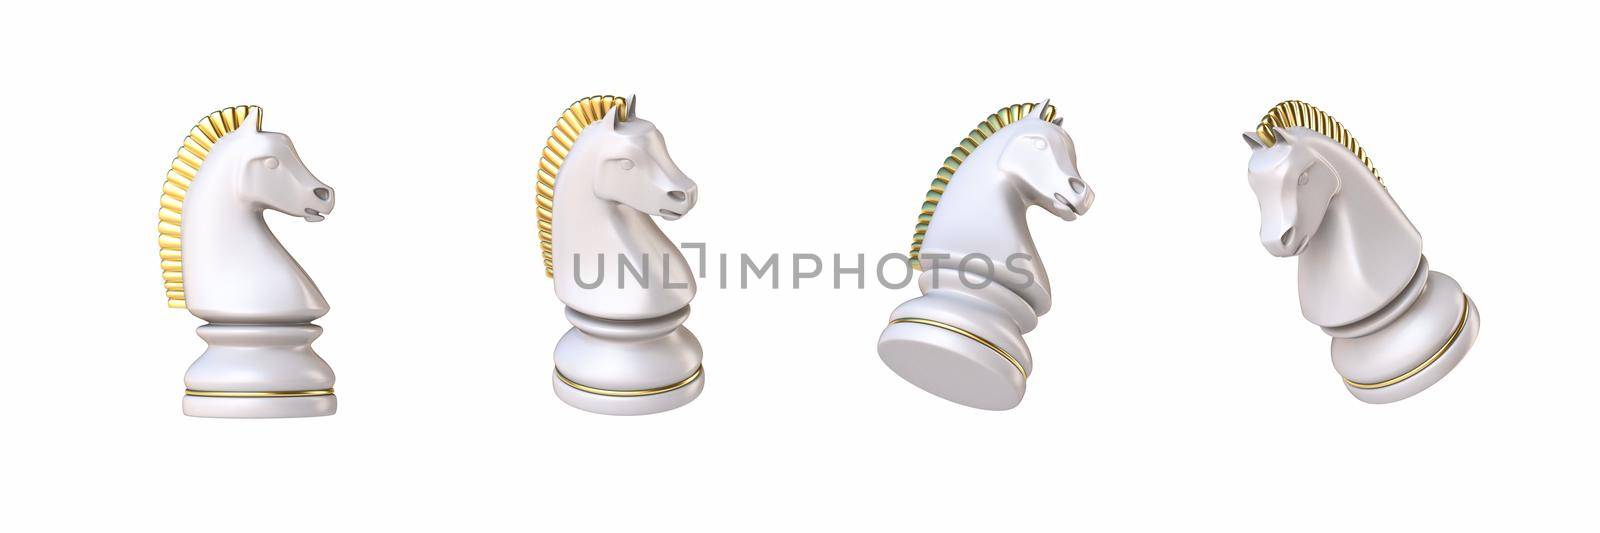 White chess Knight in four different angled views 3D rendering illustration isolated on white background